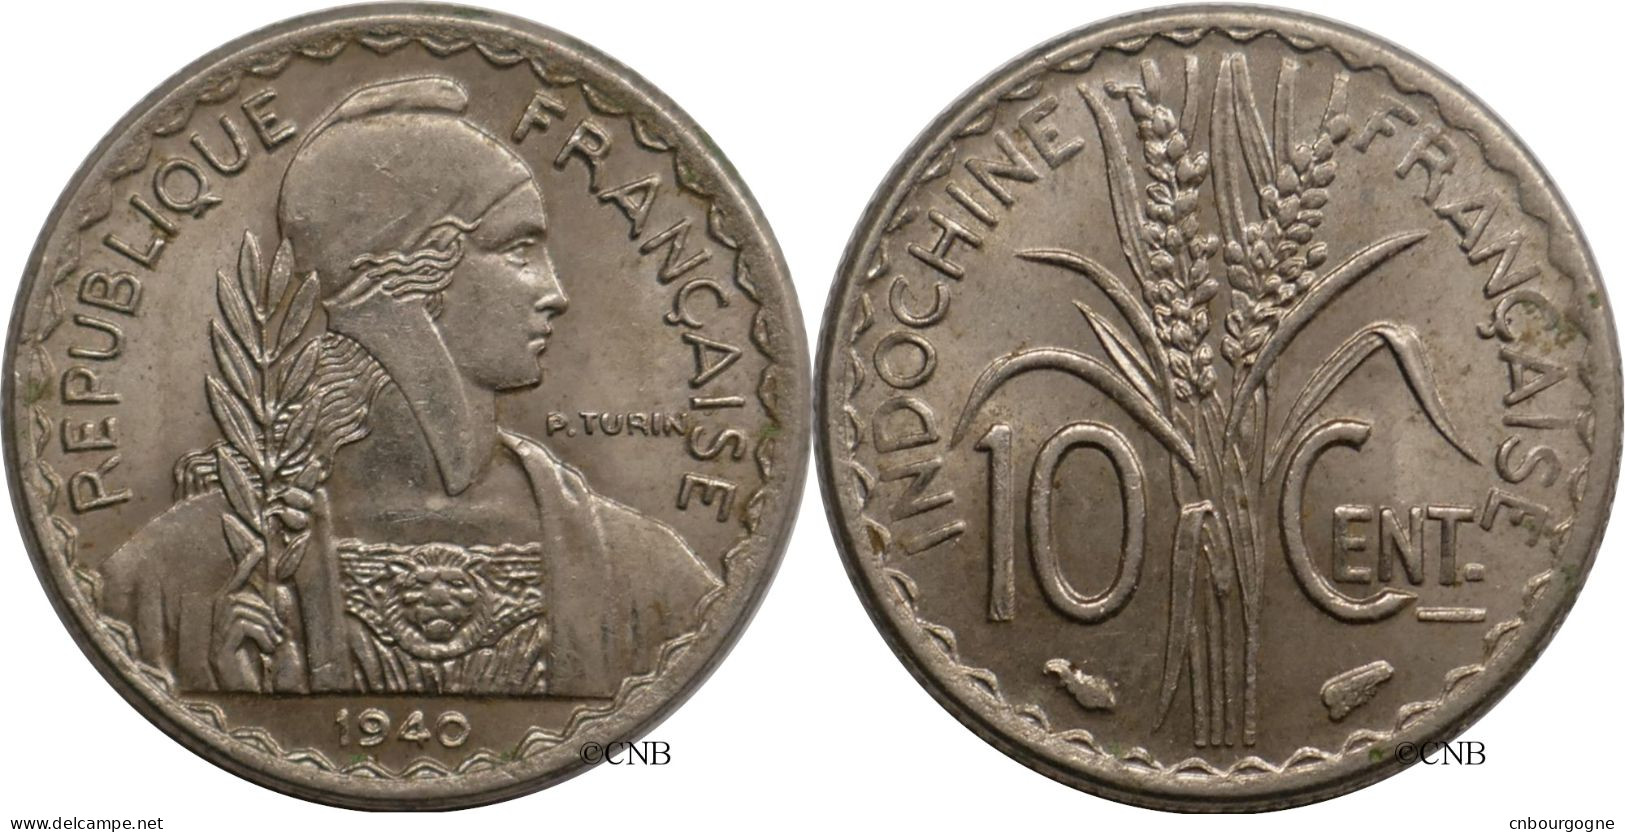 Indochine - Colonie Française - 10 Centimes 1940 - SUP/AU58 - Mon6325 - French Indochina